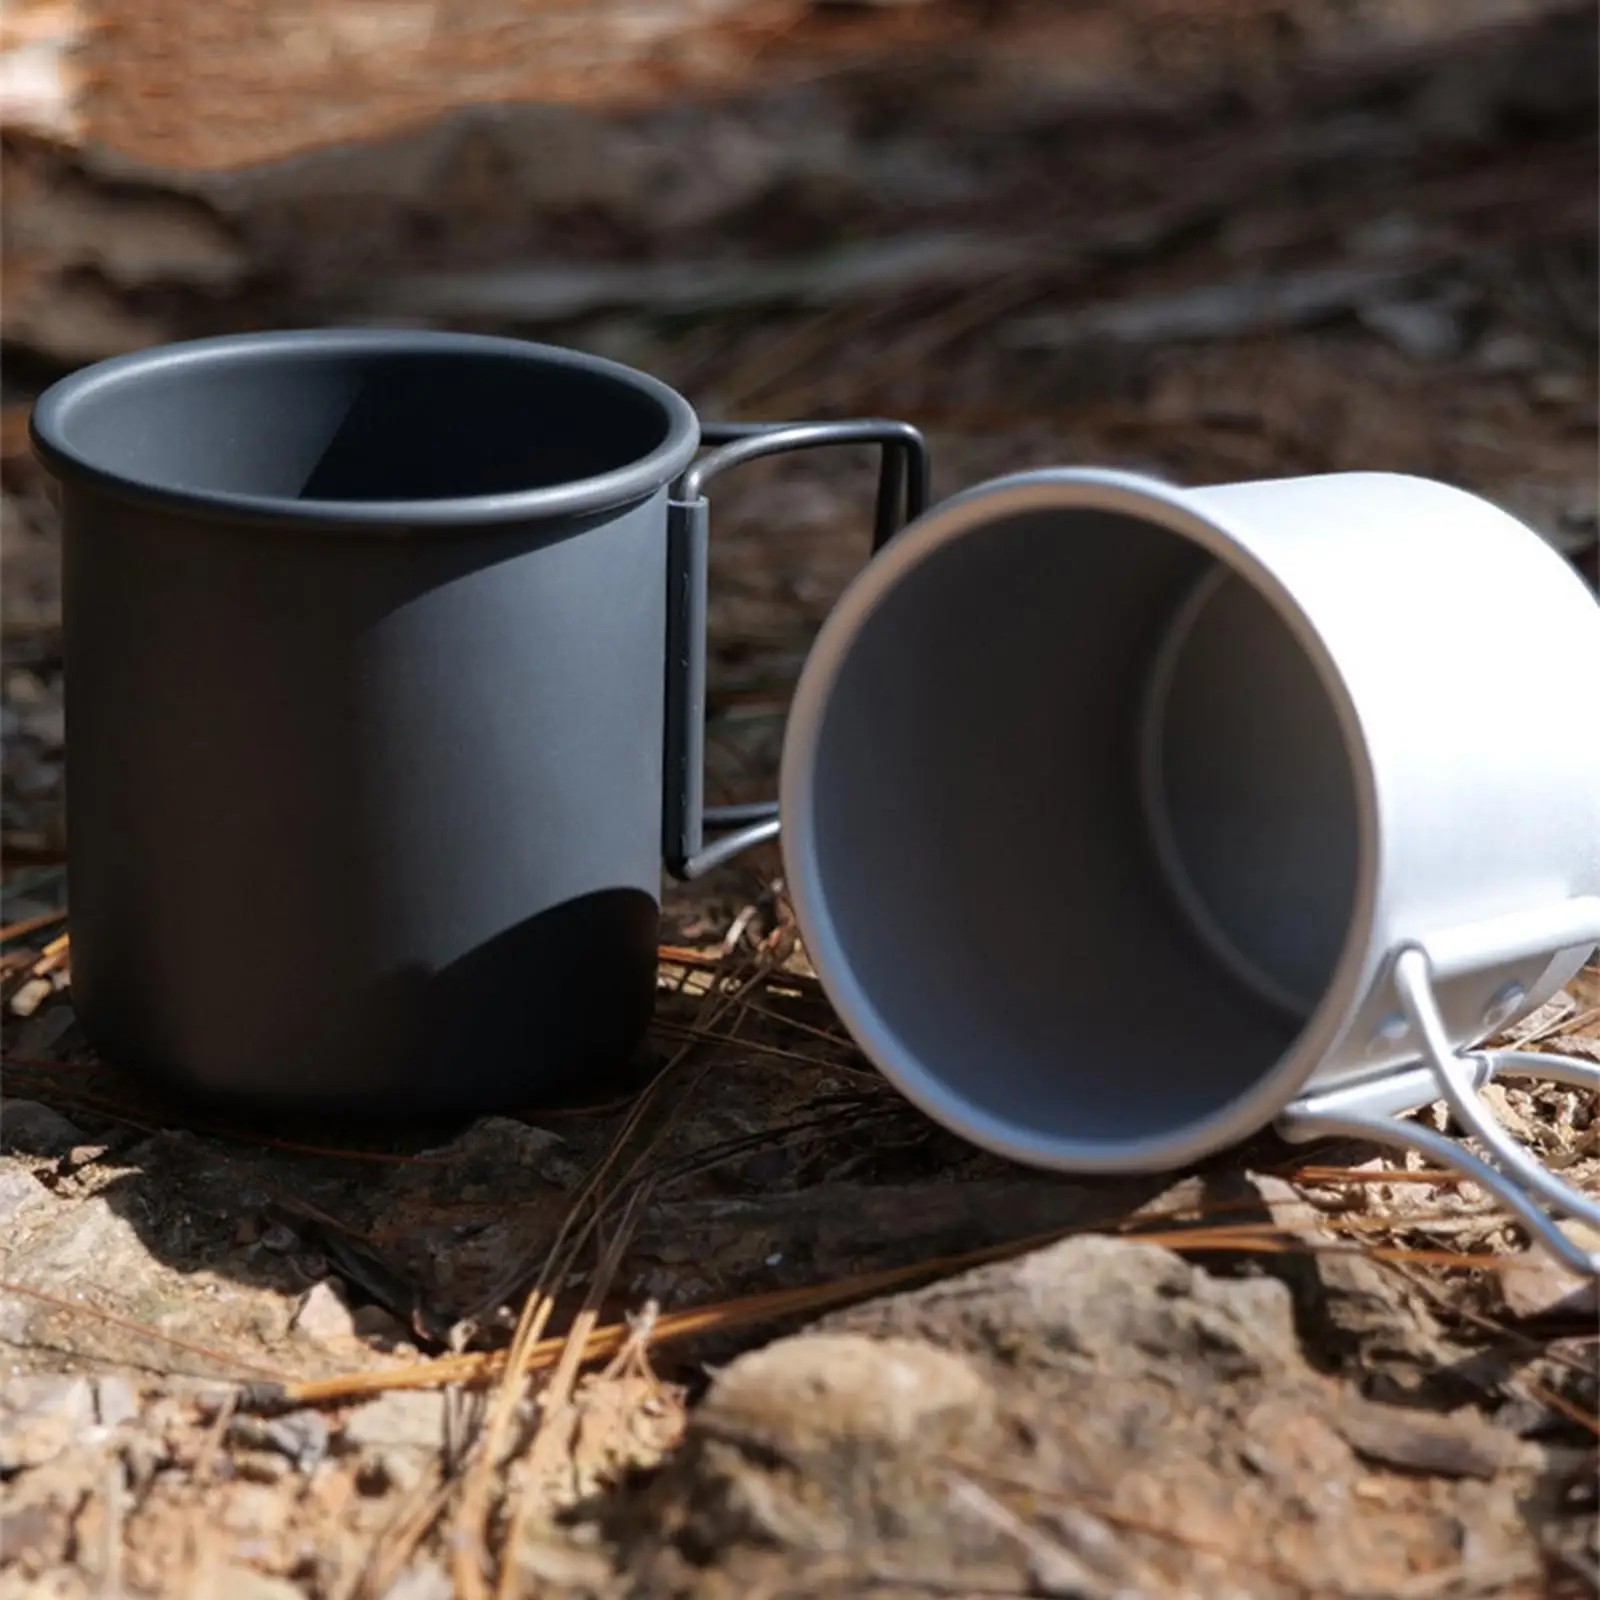 Coffee Mug Camping Cup Foldable Handle 0.3L Portable Easy to Use Alloy Multifunction Water Cup for Touring Trips Hiking Picnic